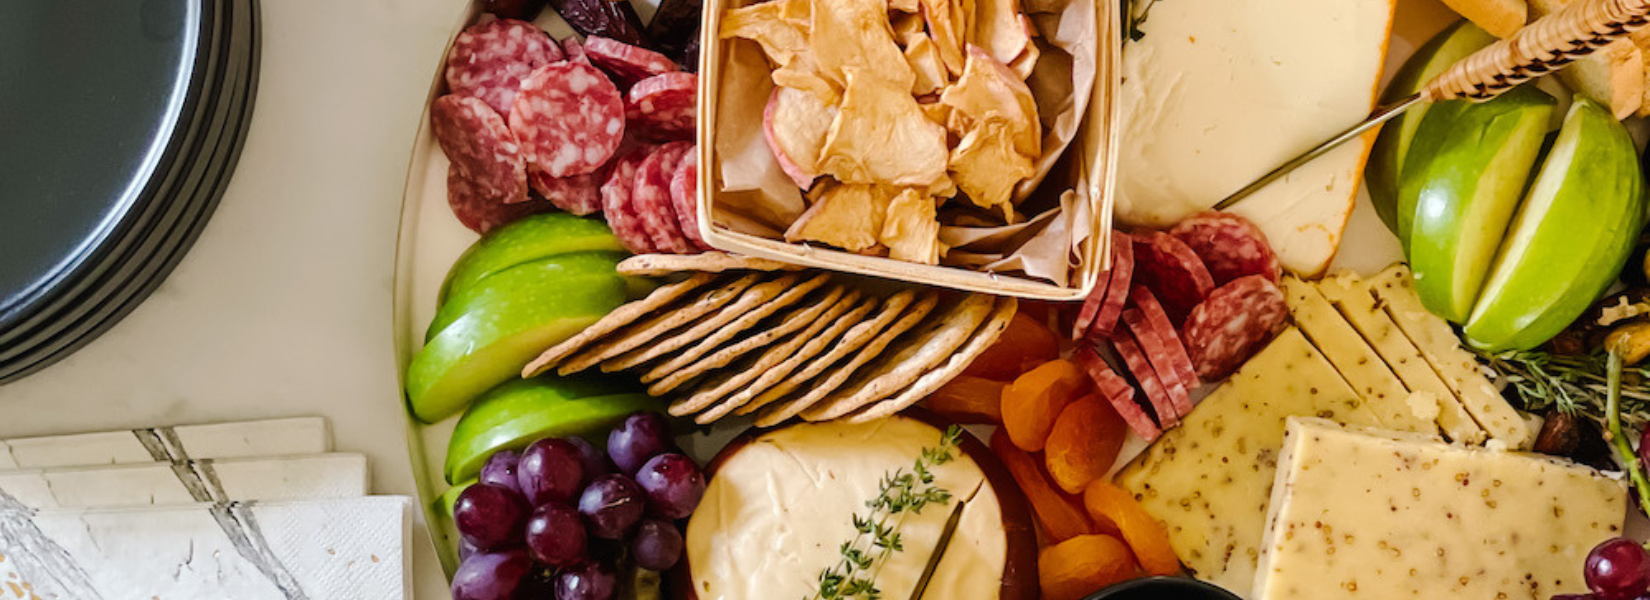 How to Build the Perfect Fall Cheese Board - hostessology